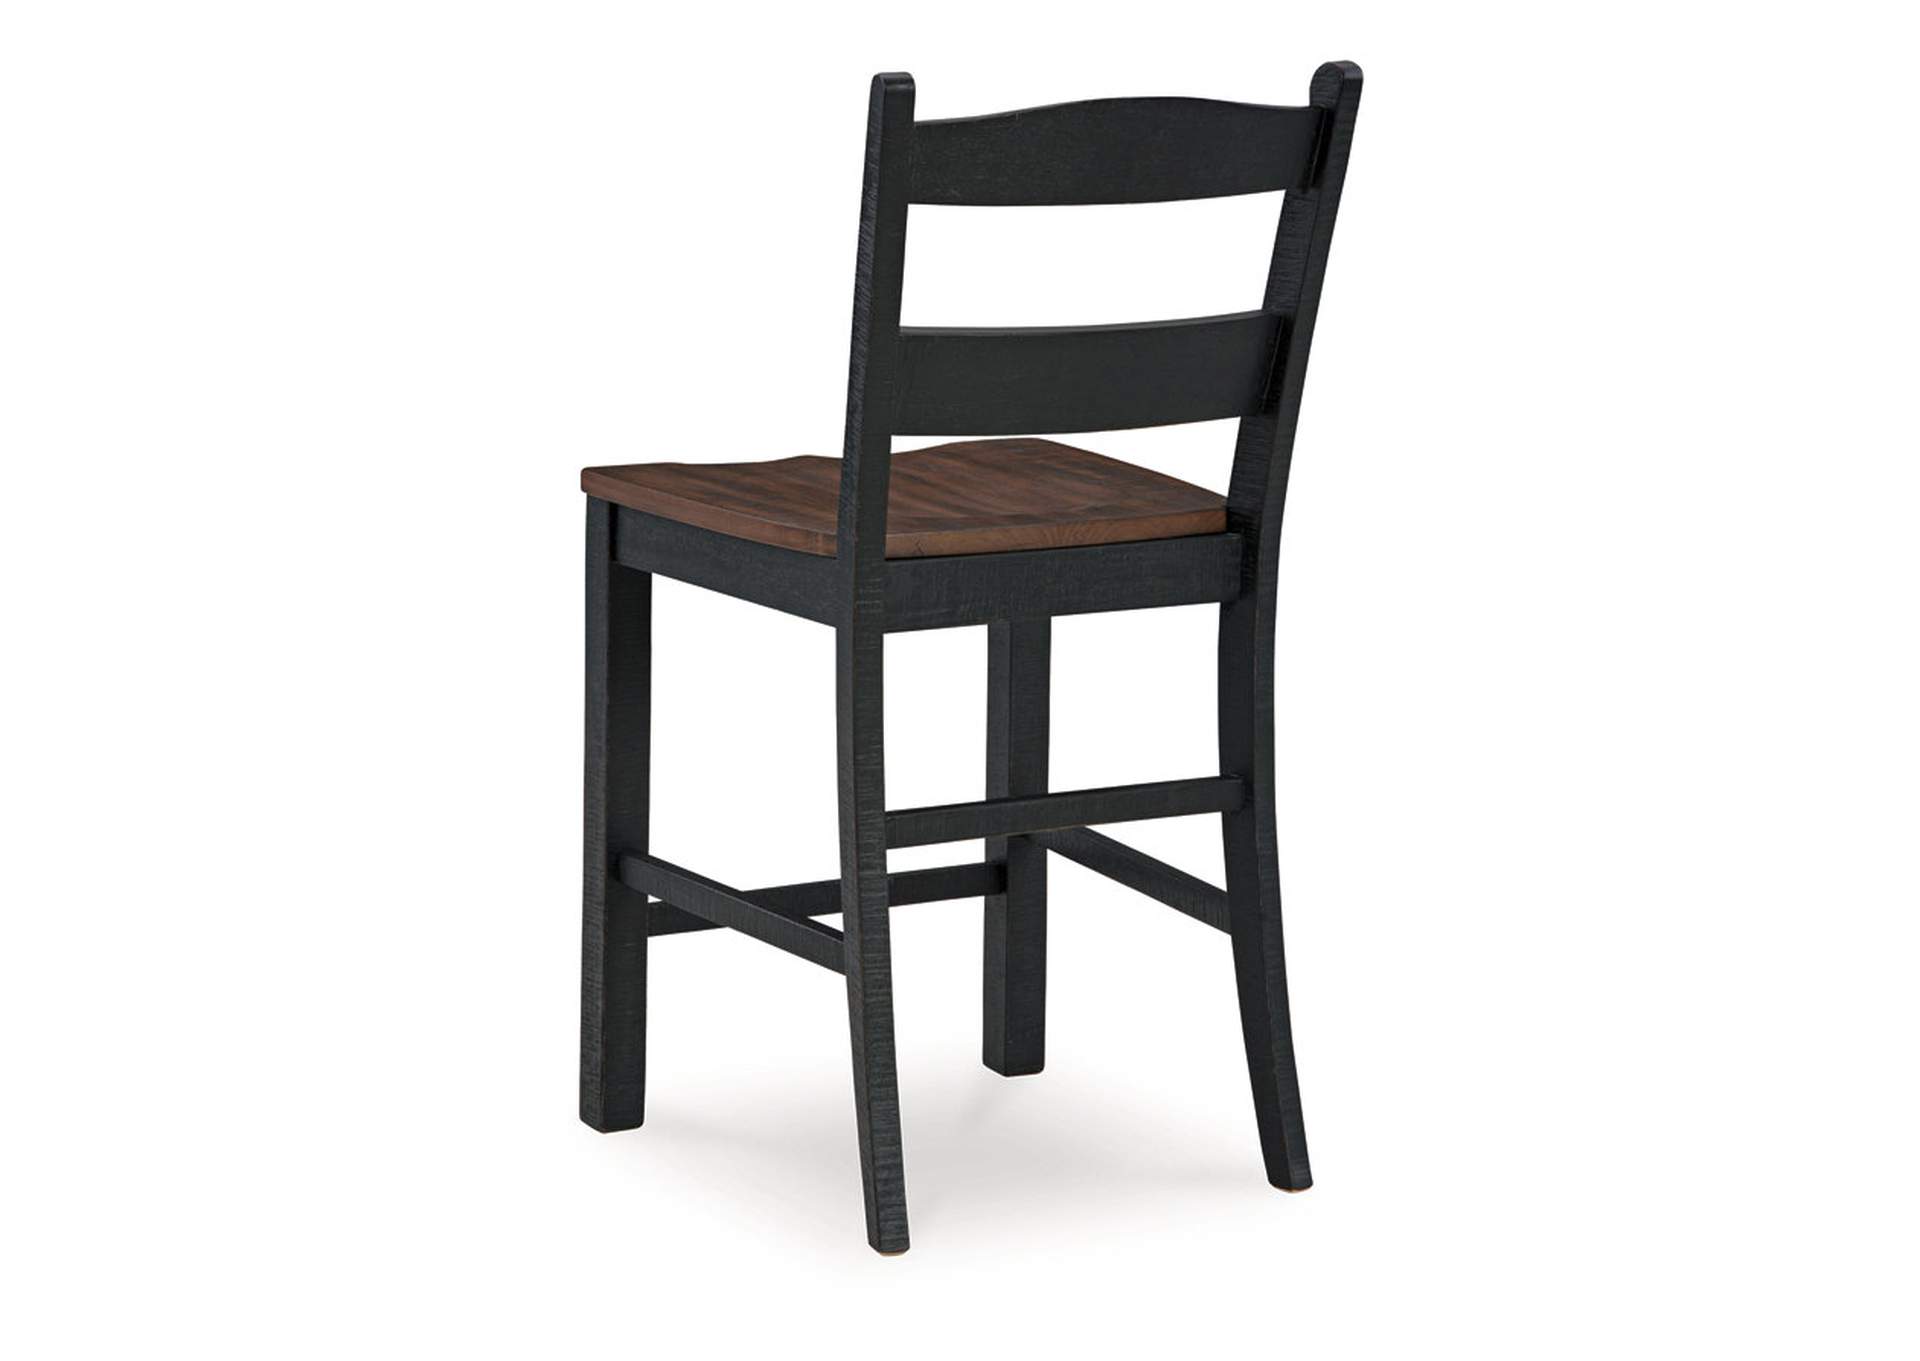 Valebeck Counter Height Barstool (Set of 2),Signature Design By Ashley